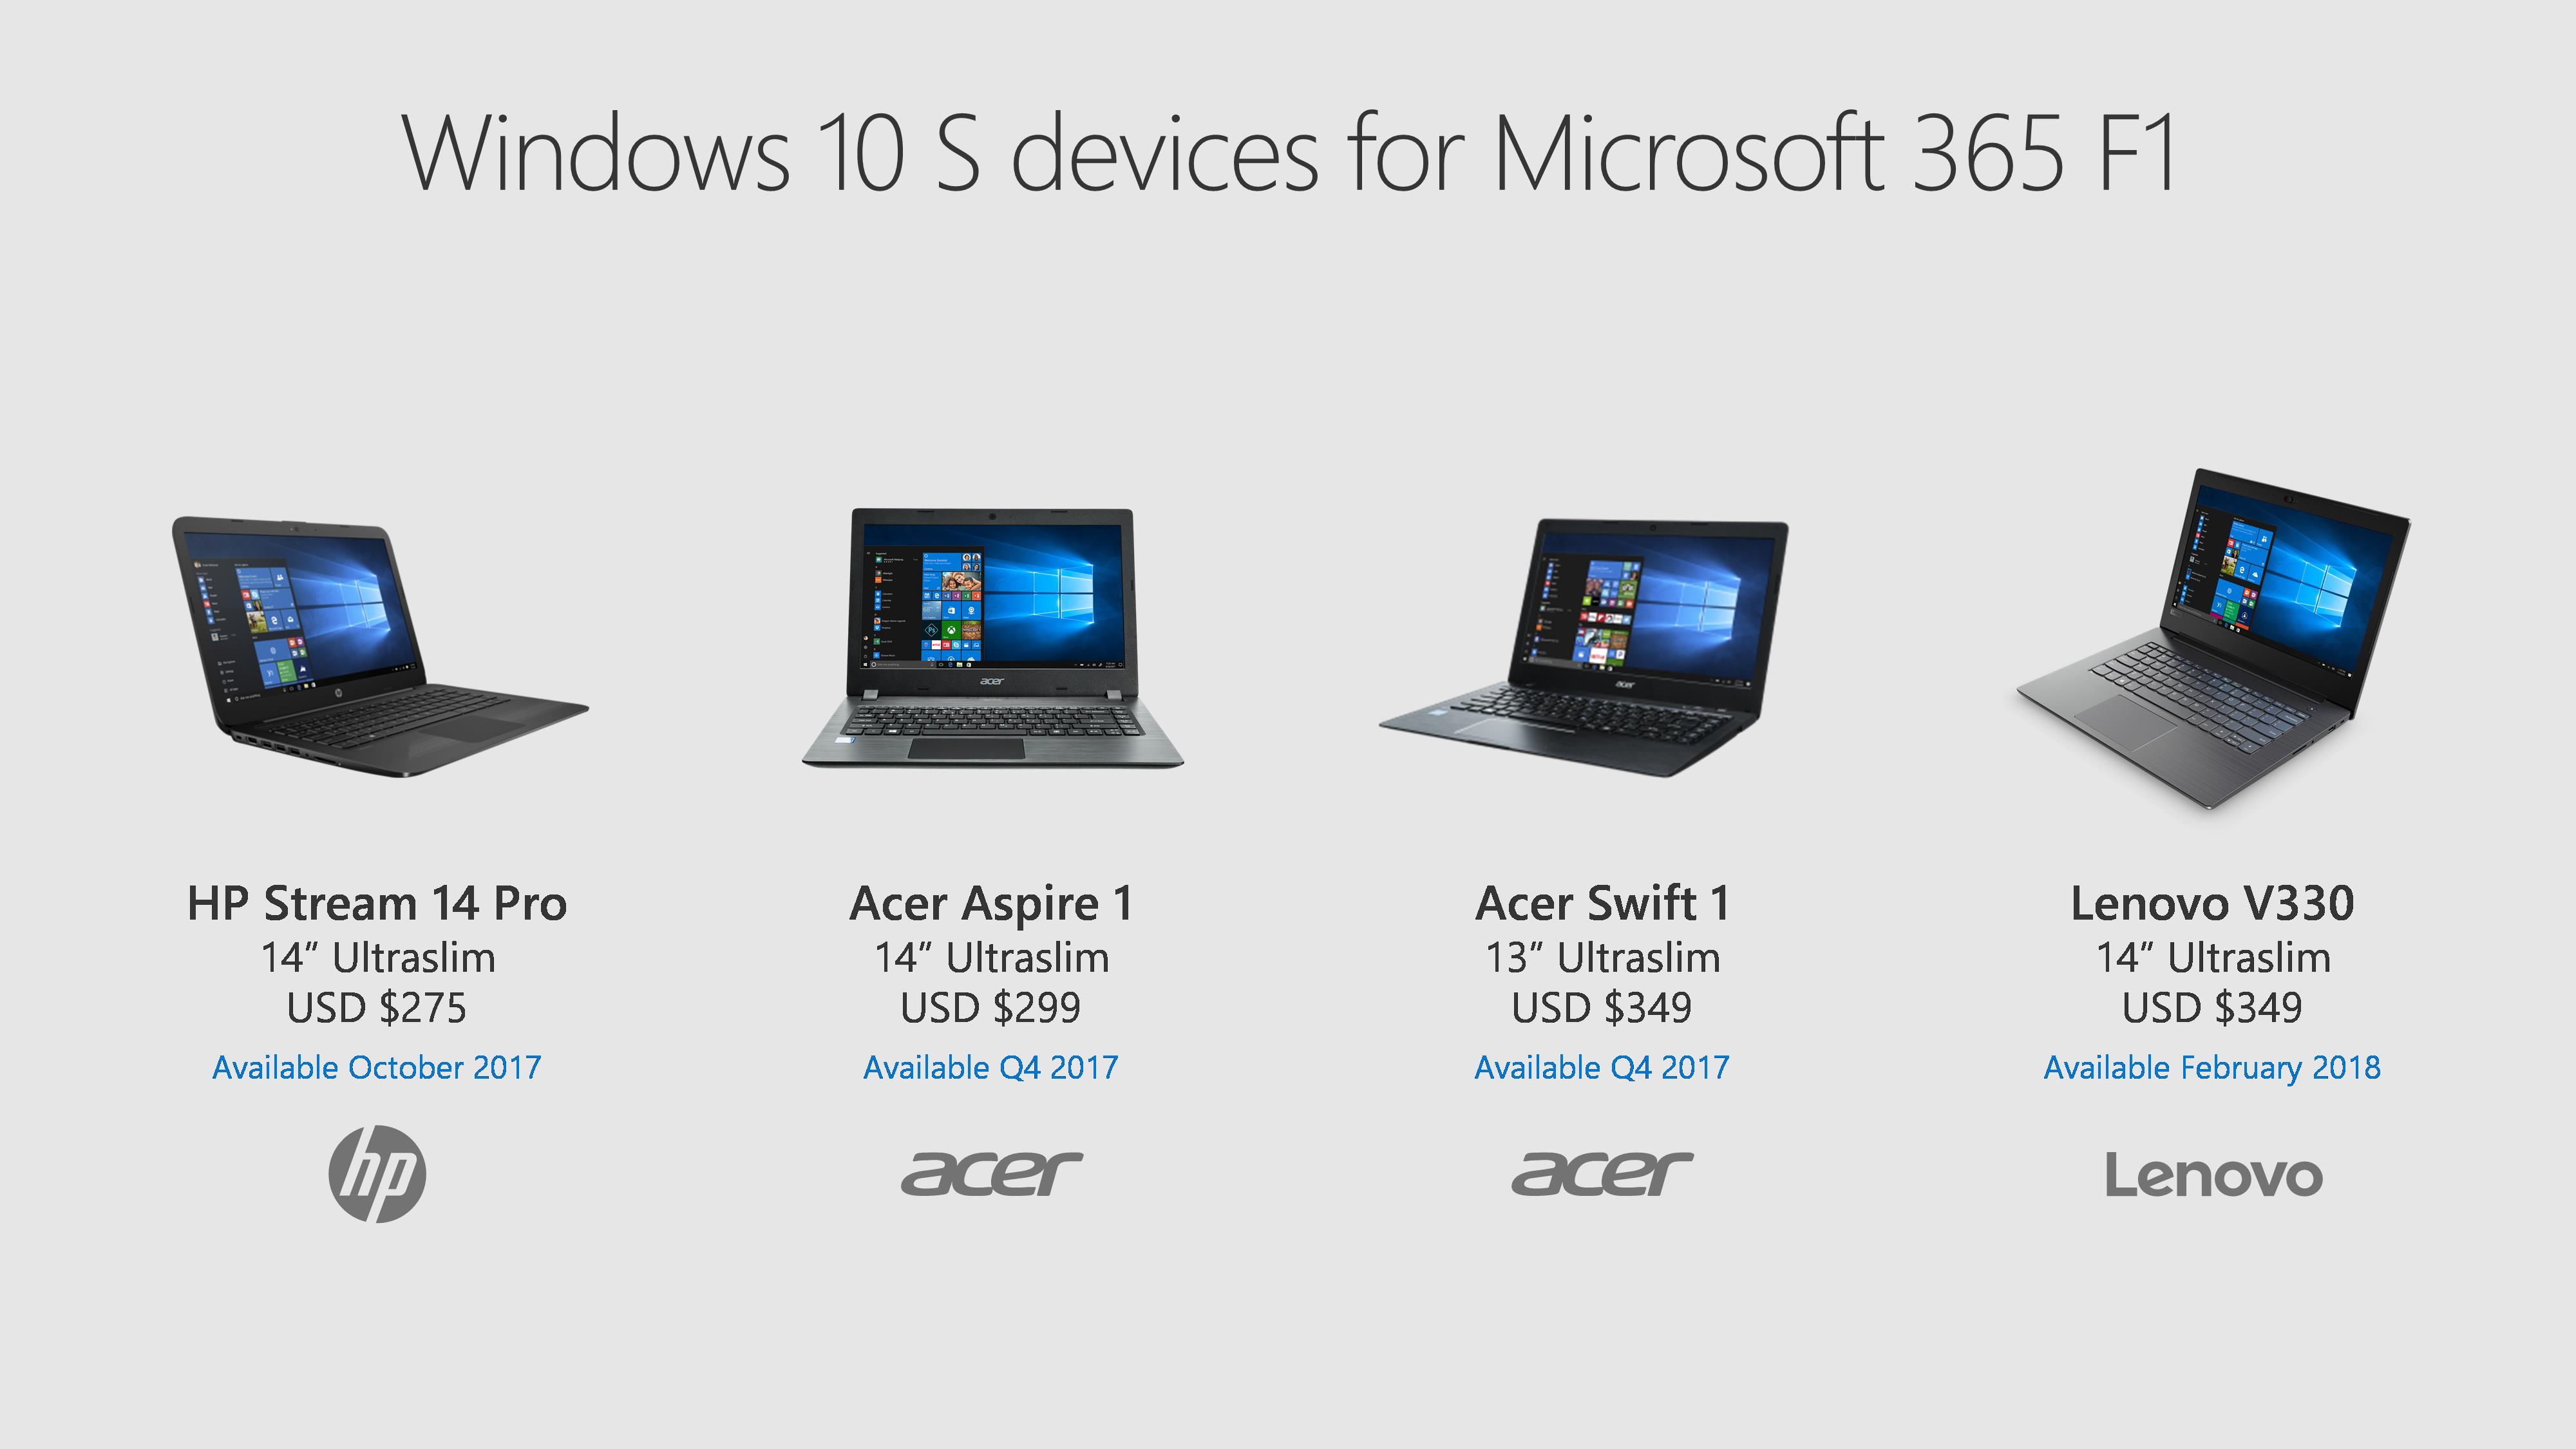 Windows 10 S devices for Microsoft 365 F1